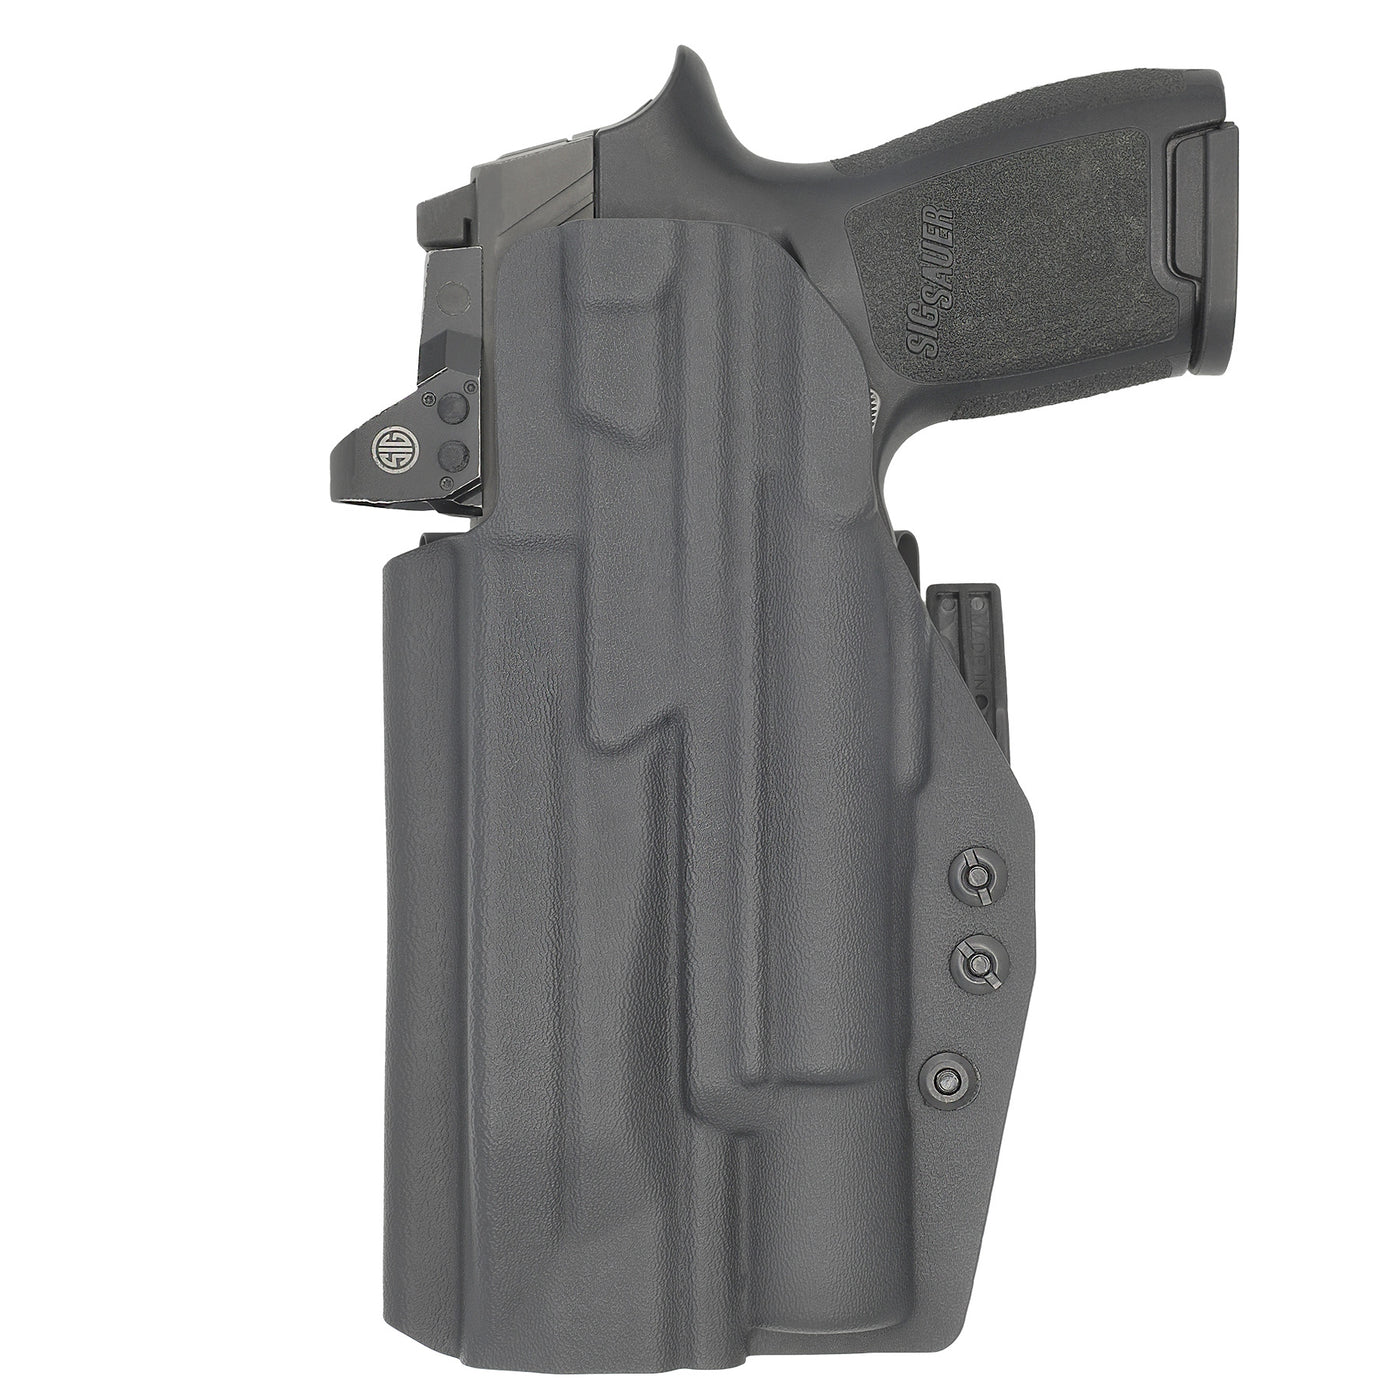 C&G Holsters Quickship IWB ALPHA UPGRADE Tactical H&K 45/c Surefire X300 in holstered position back view